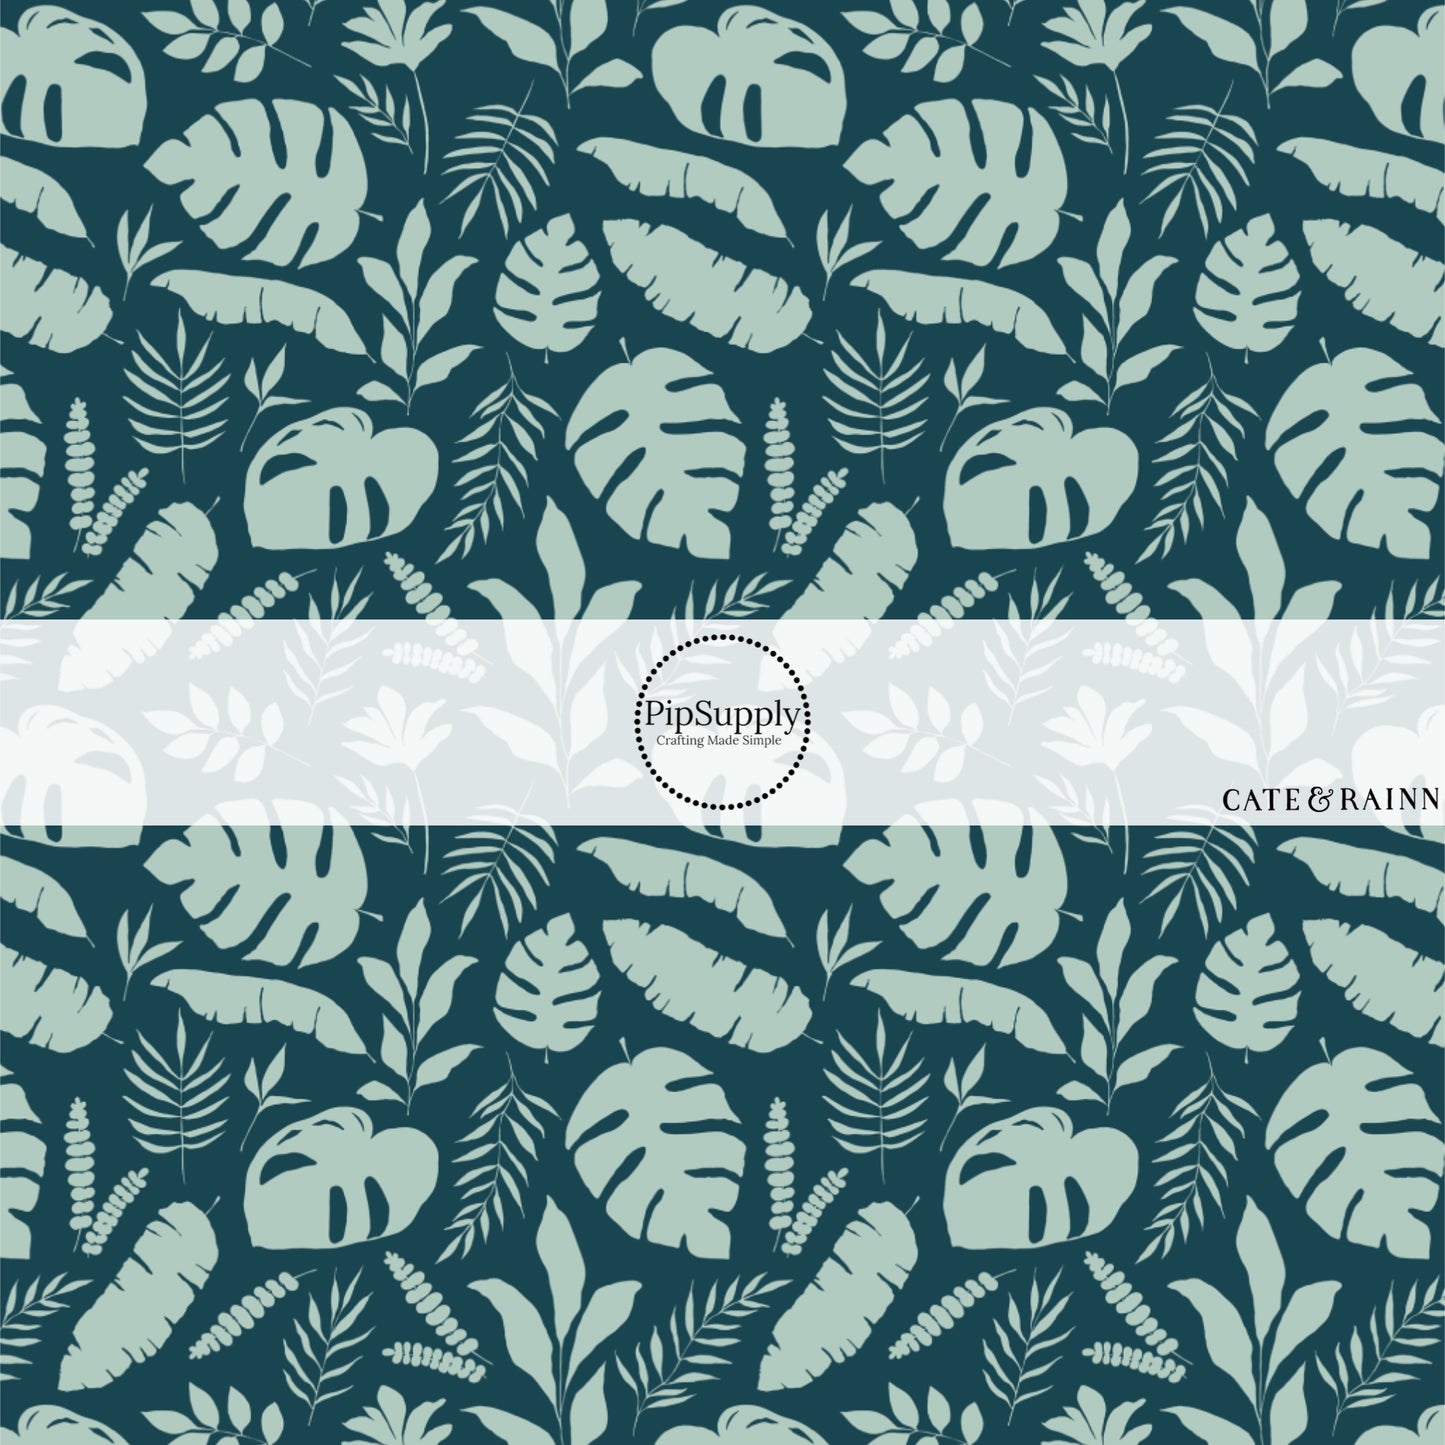 These jungle pattern fabric by the yard features tropical jungle foliage colorblocks. This fun fabric can be used for all your sewing and crafting needs!